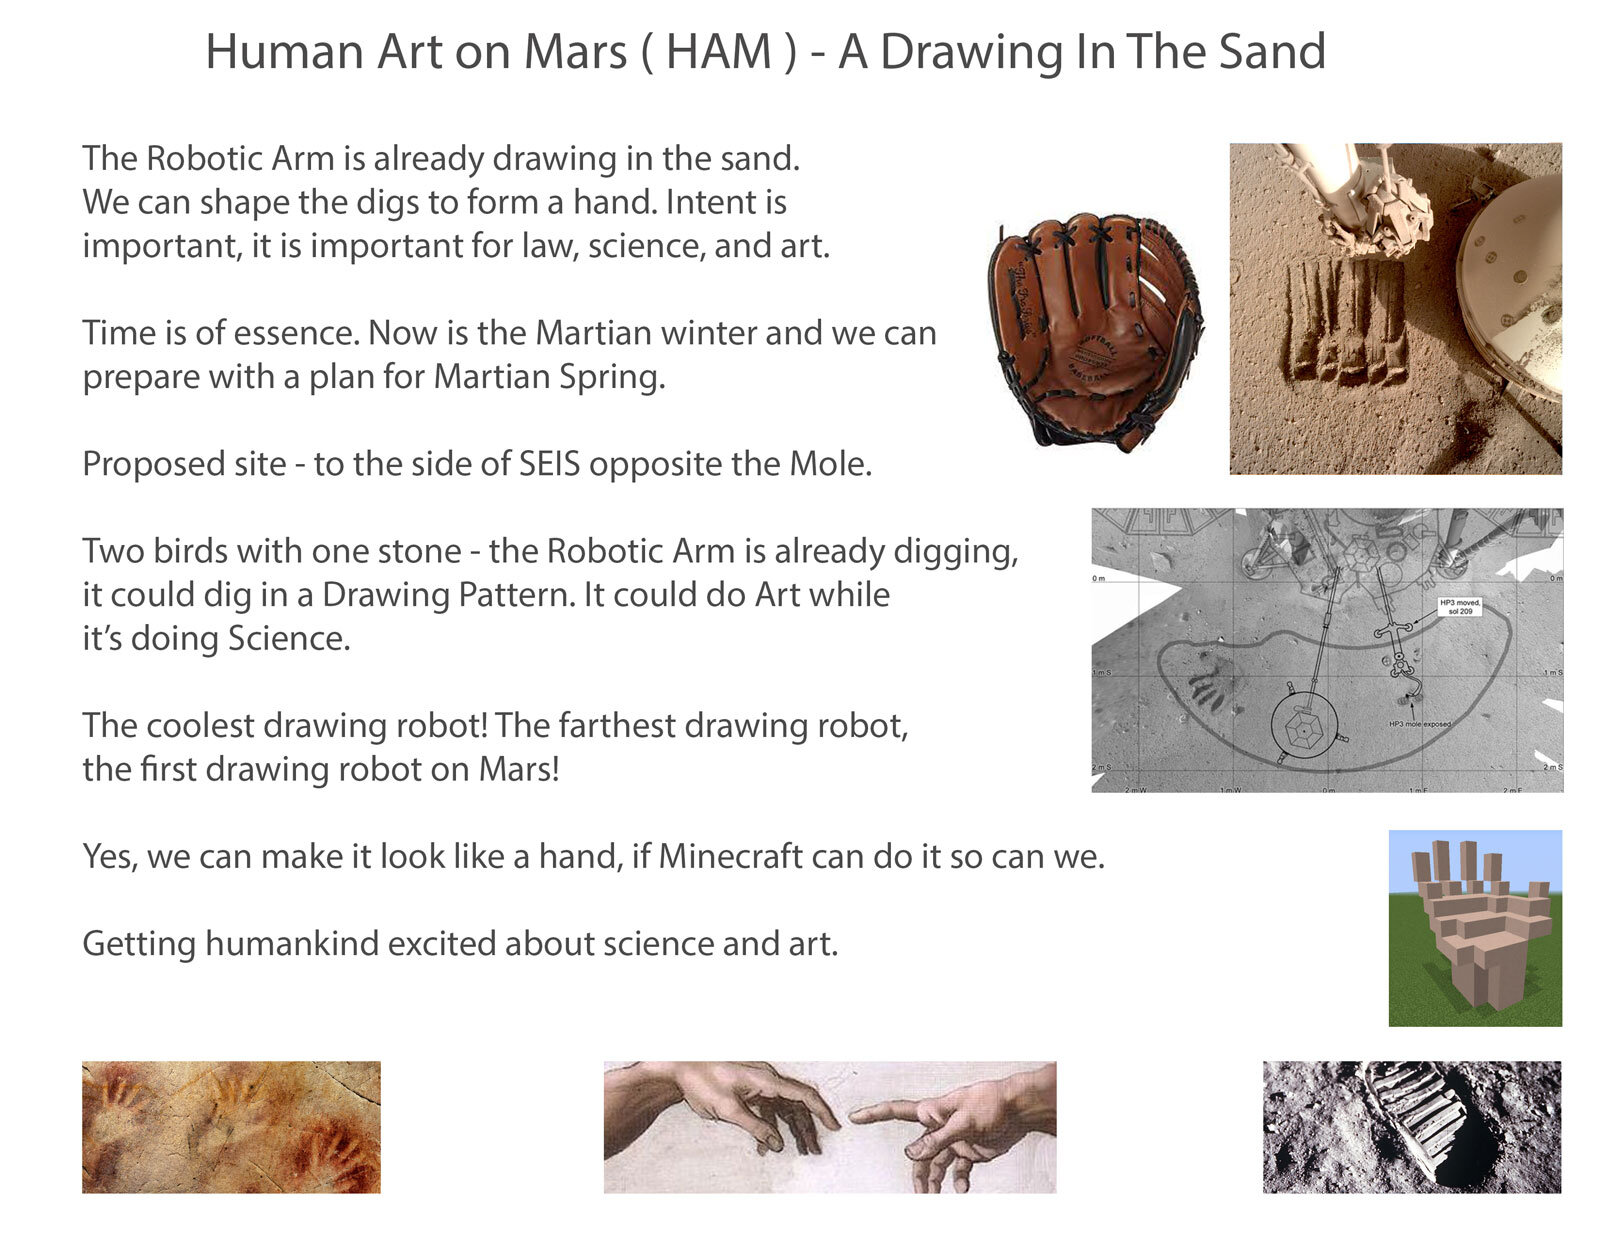 Proposal for a drawing in the sand of another planet